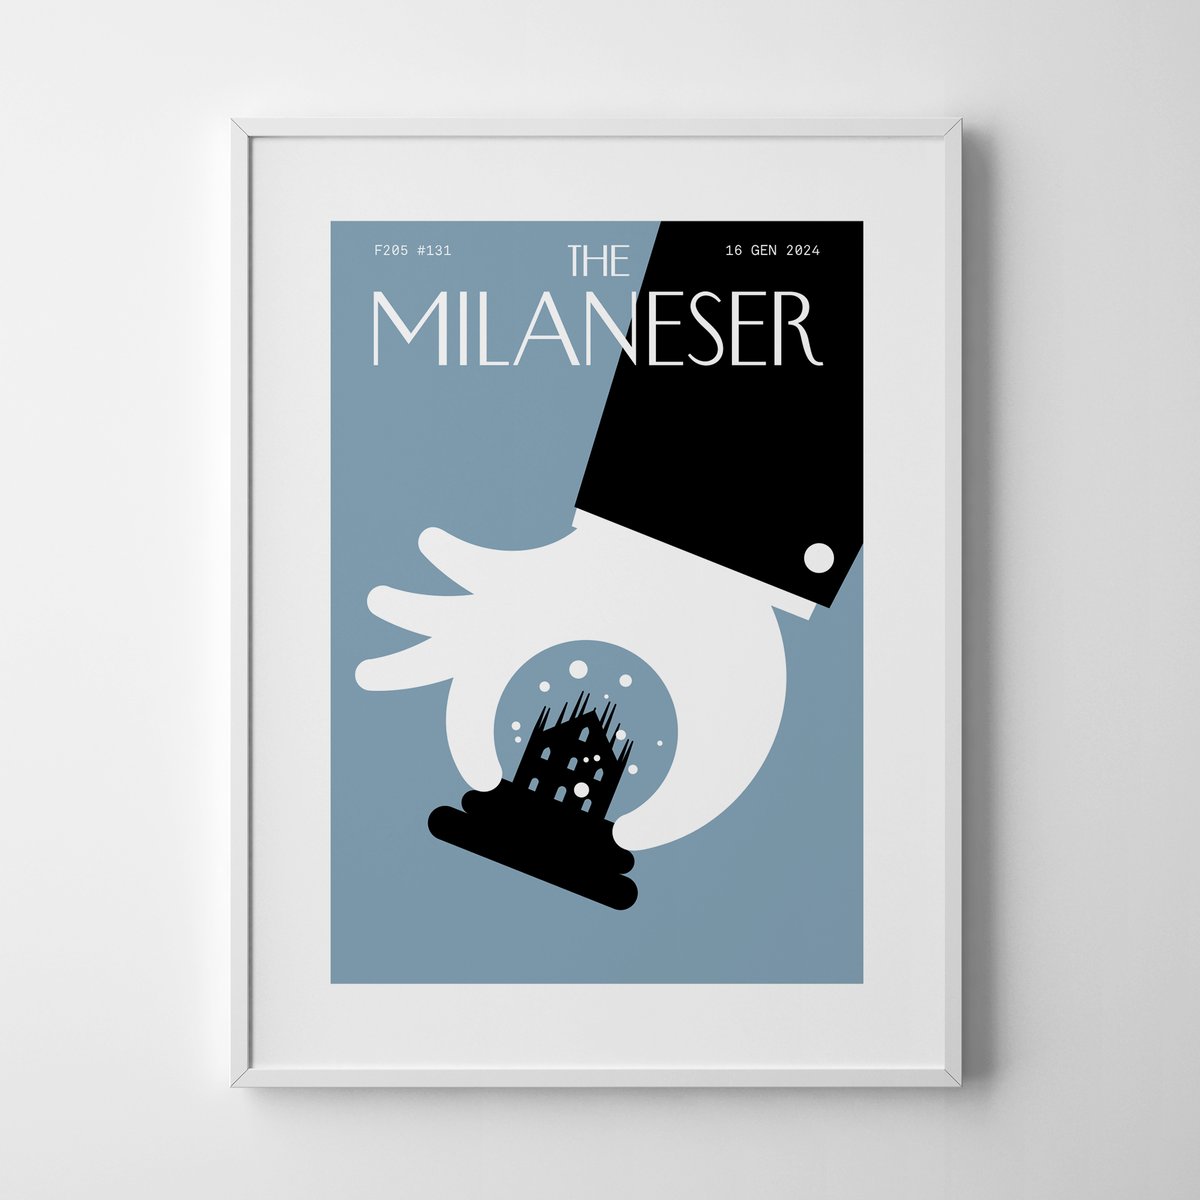 The Shop | Milaneser Products